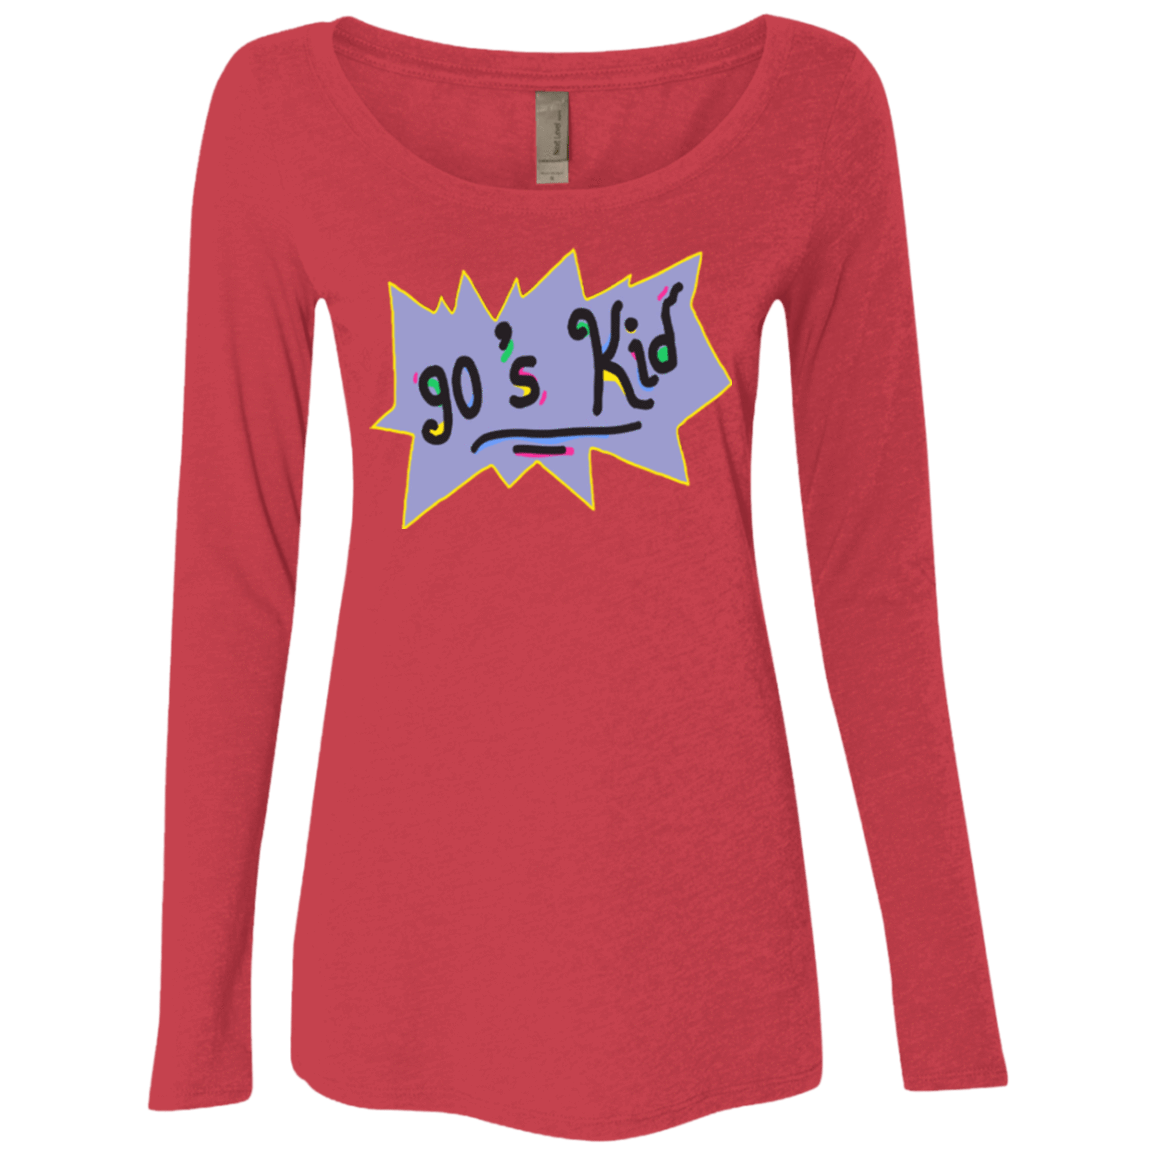 T-Shirts Vintage Red / Small 90's Kid Women's Triblend Long Sleeve Shirt